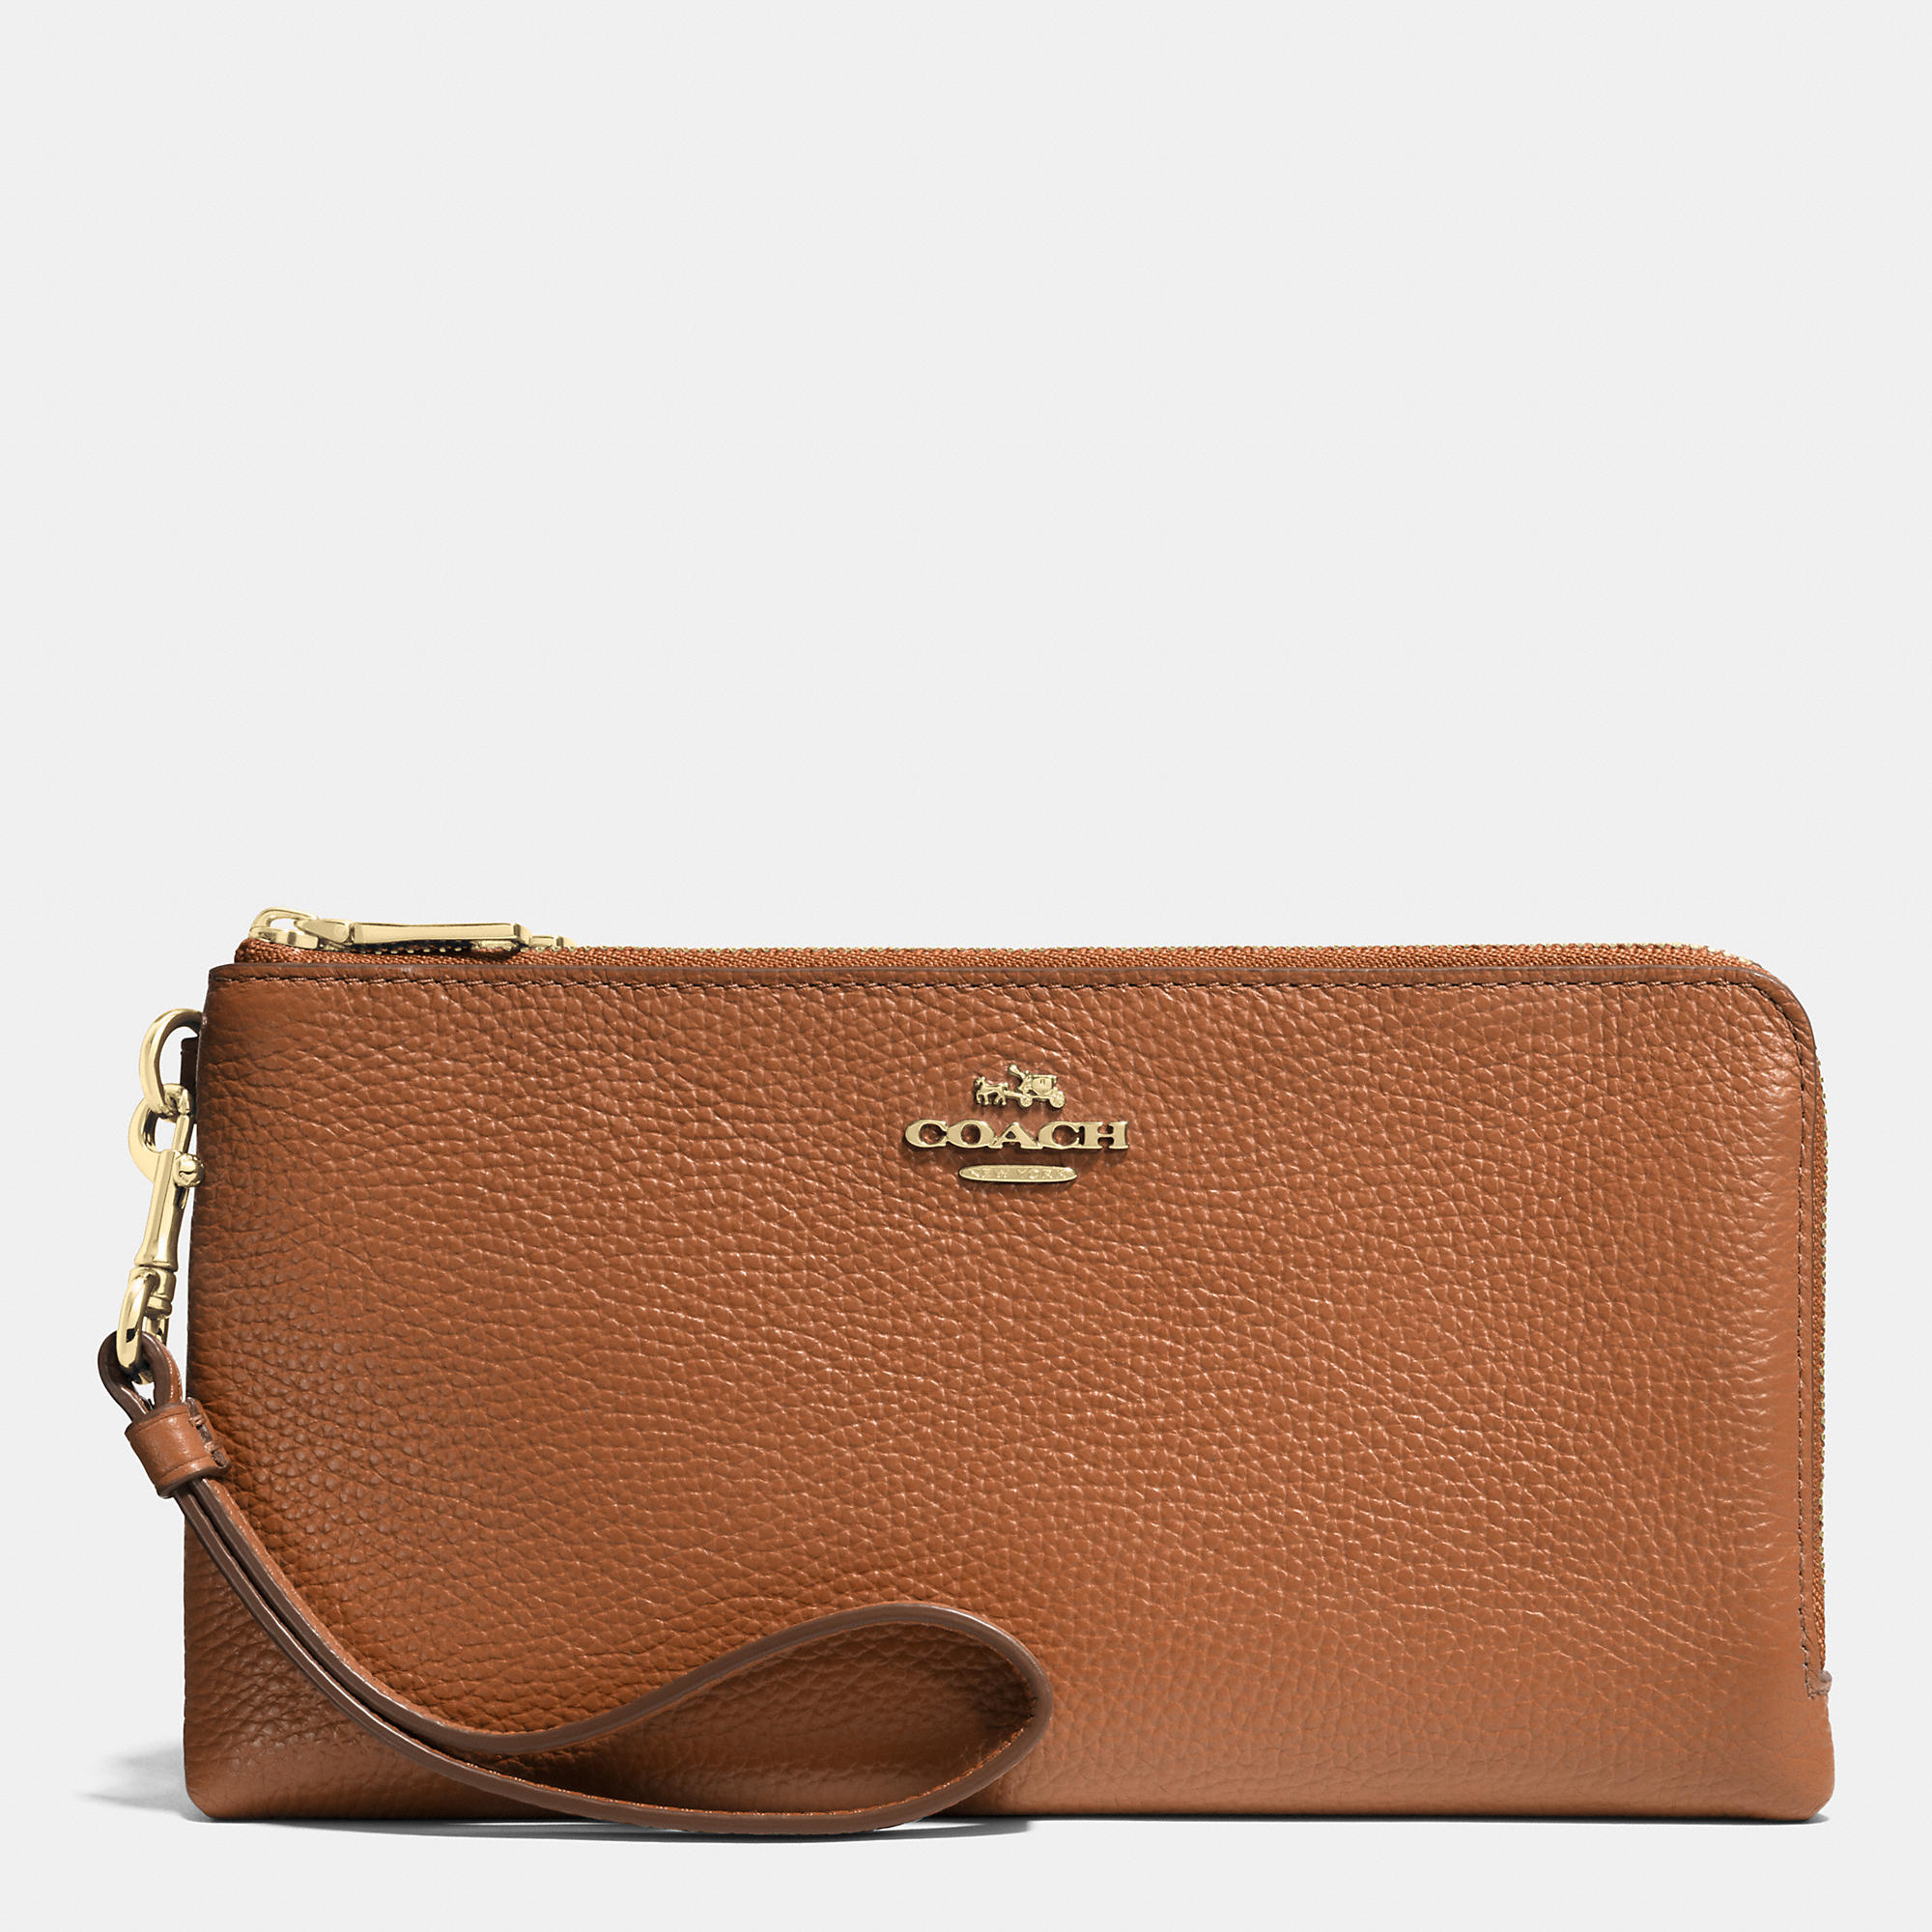 Coach Double Zip Wallet In Pebble Leather | Coach Outlet Canada